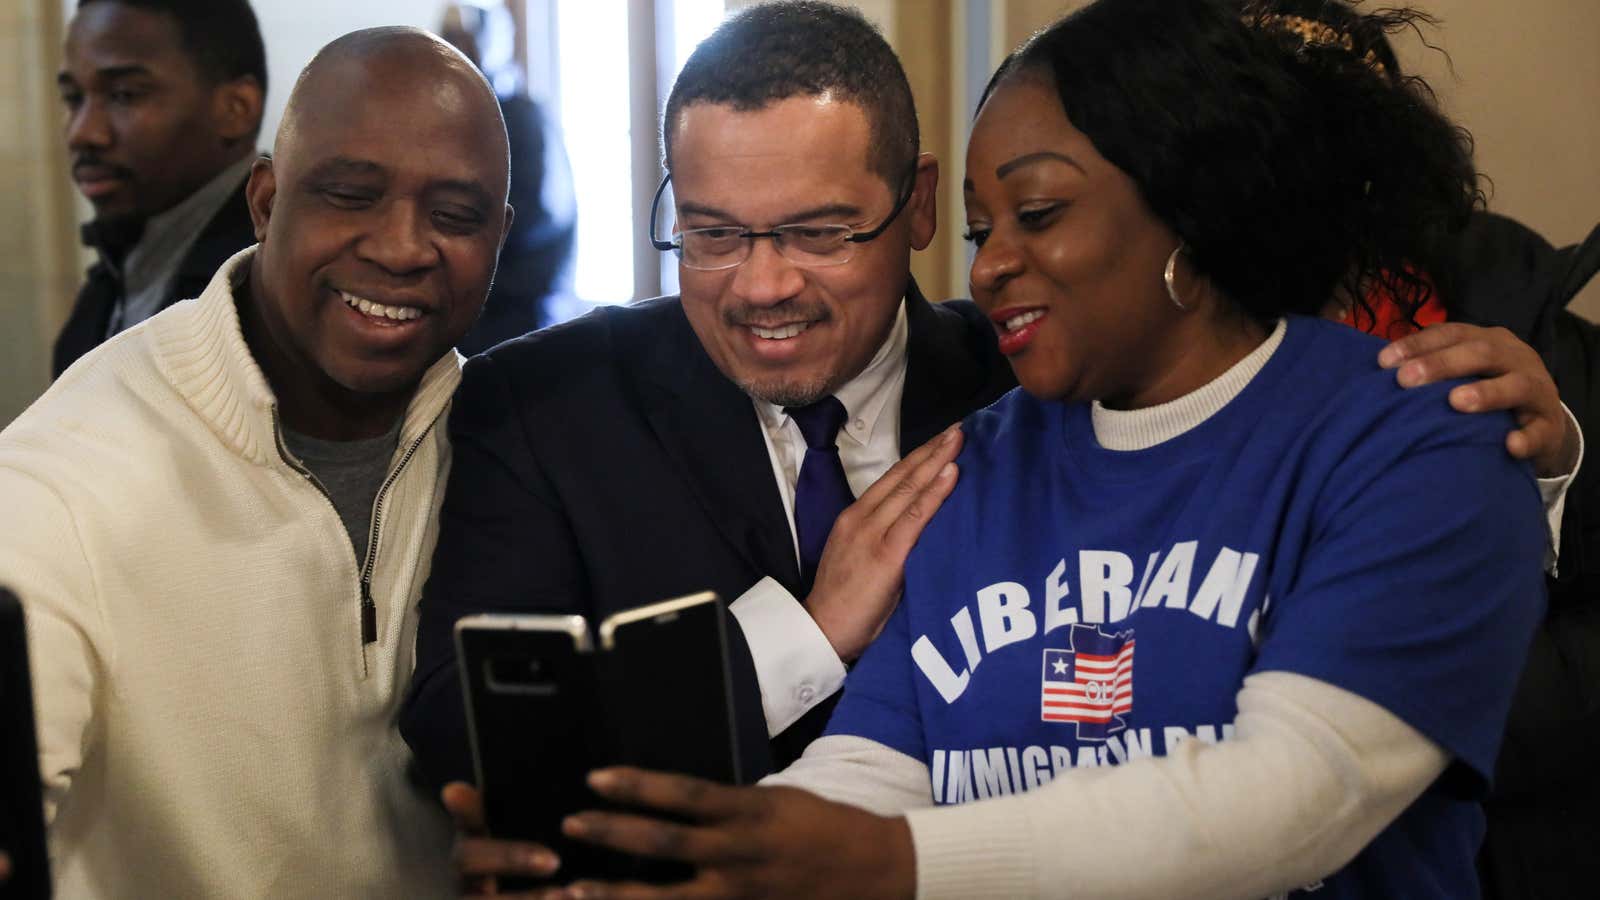 Liberian activists take a selfie with Minnesota Attorney General Keith Ellison at a Deferred Enforced Departure (DED) immigration status rally in St. Paul, Minnesota, U.S on Feb. 22 2019.